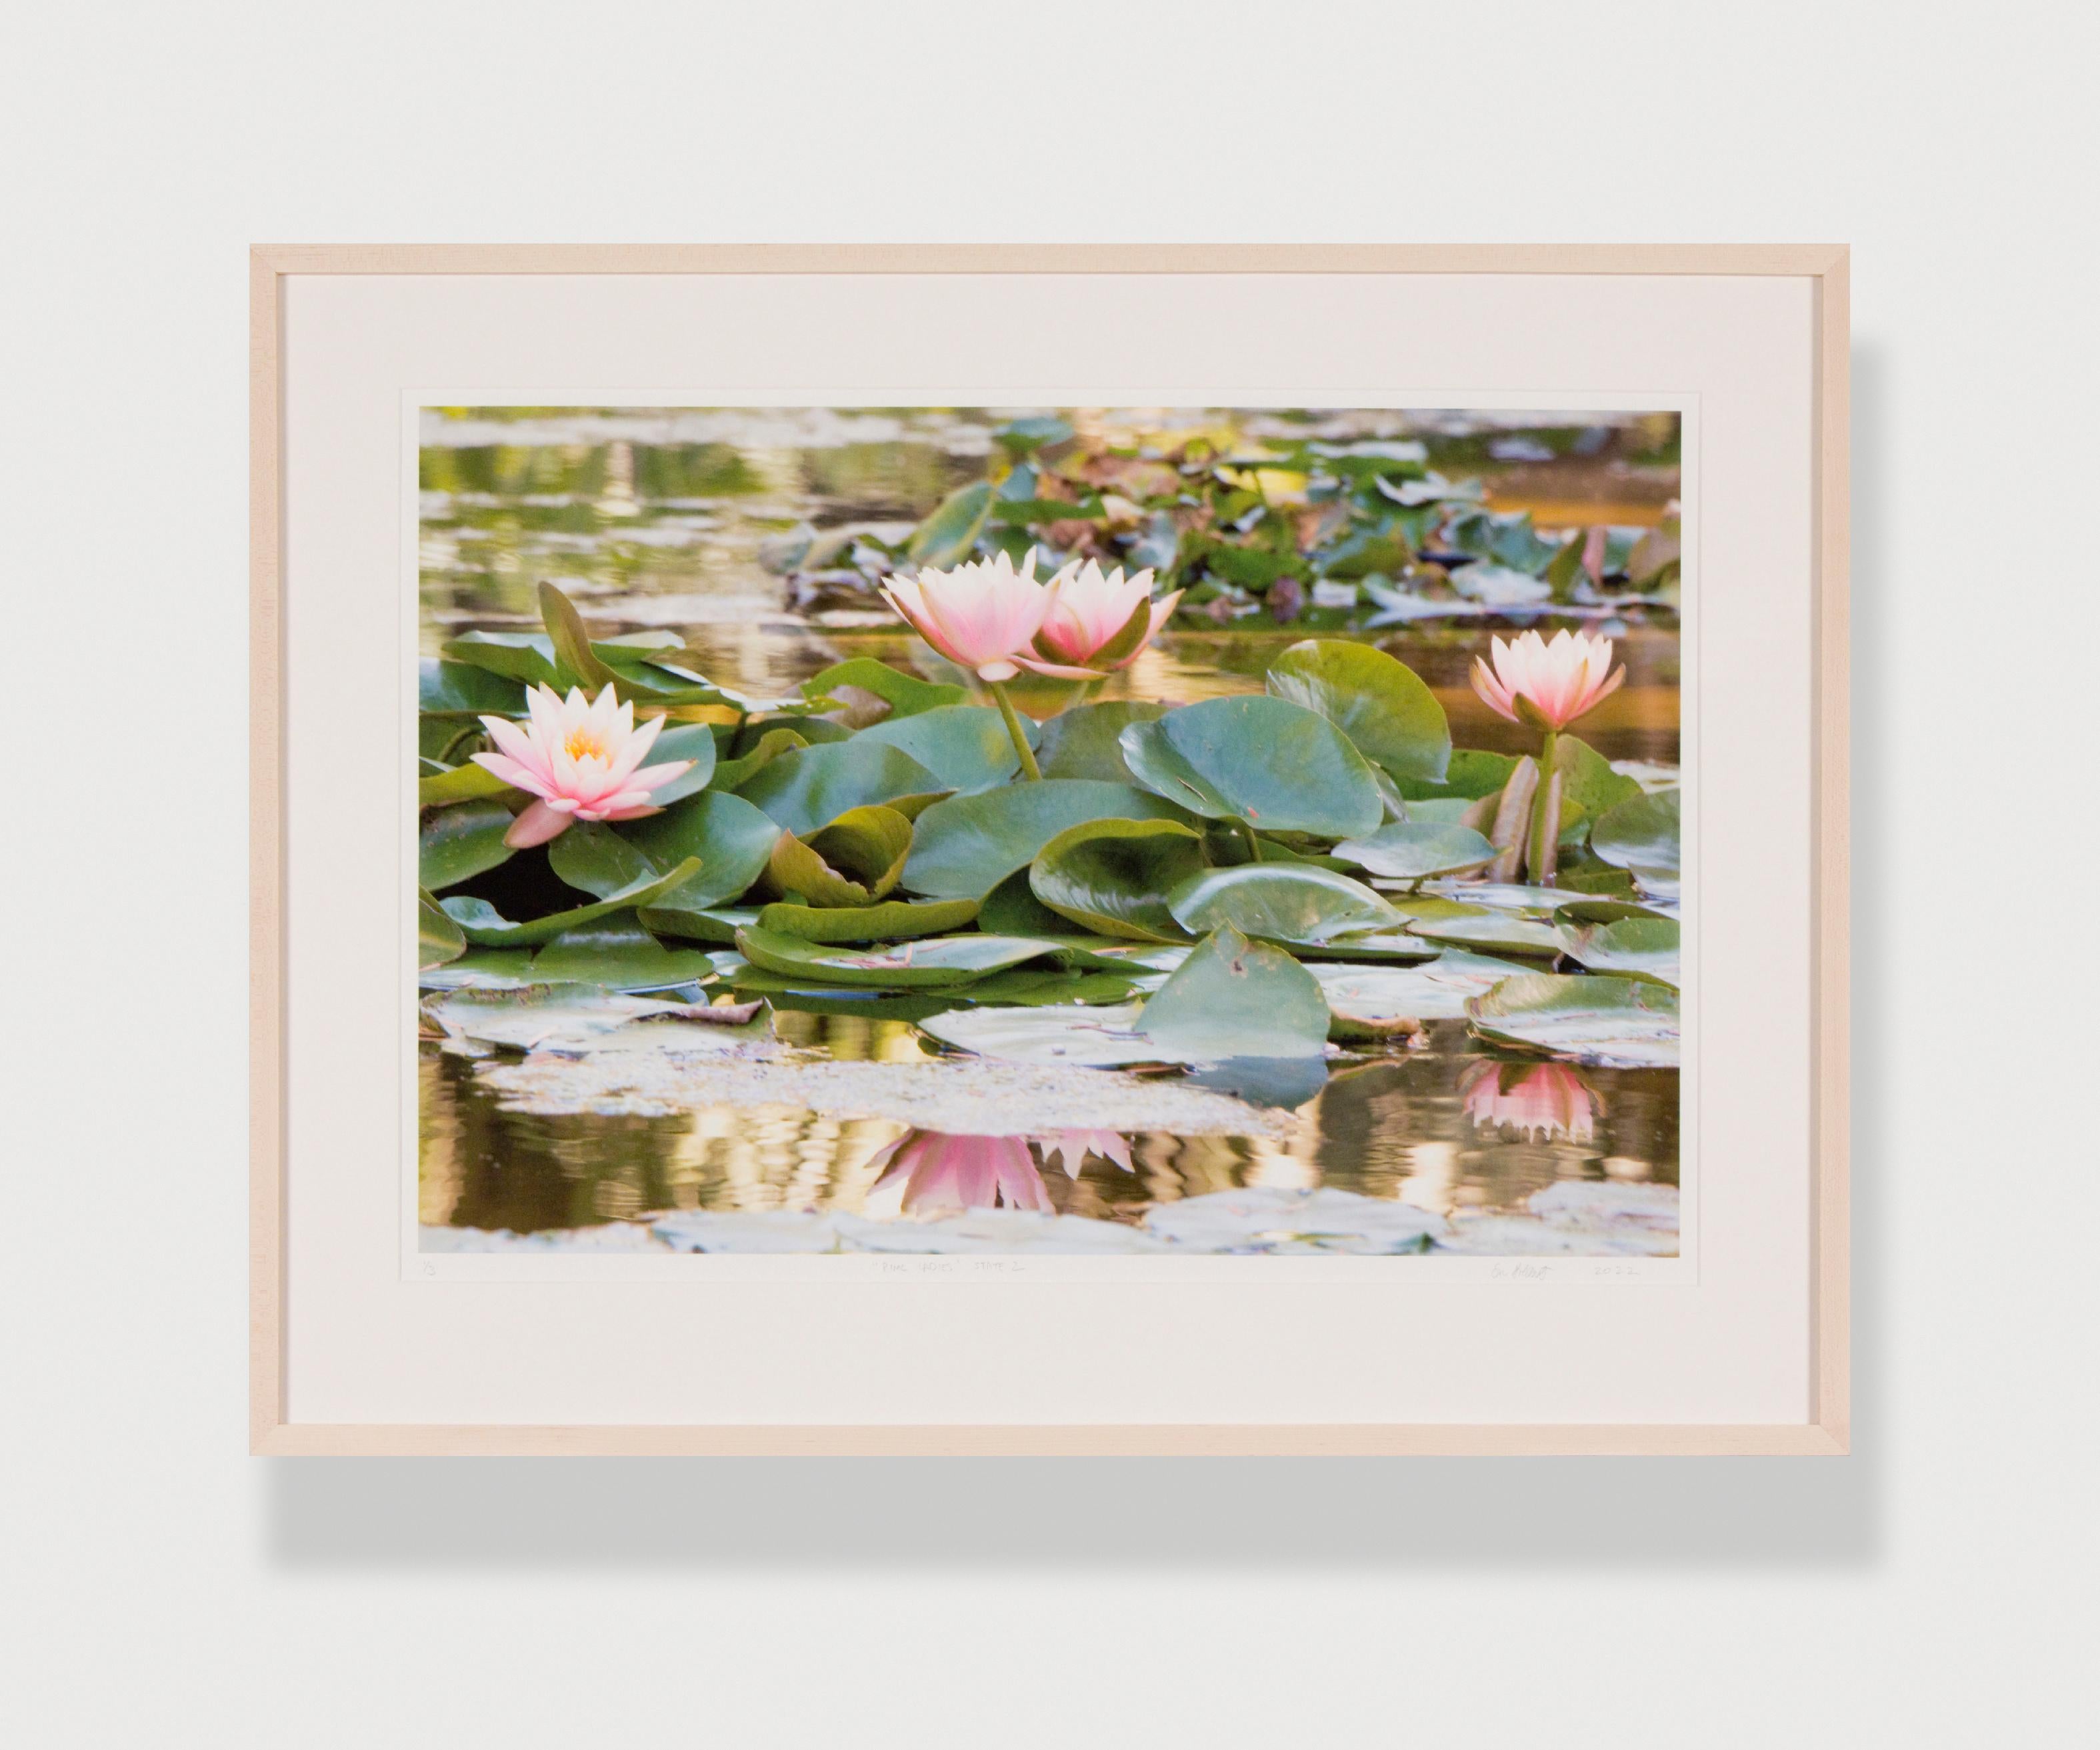 PINK LADIES STATE 2 - Floral Art Photography / Water Lily / Botanic Garden - Print by Susan Goldsmith